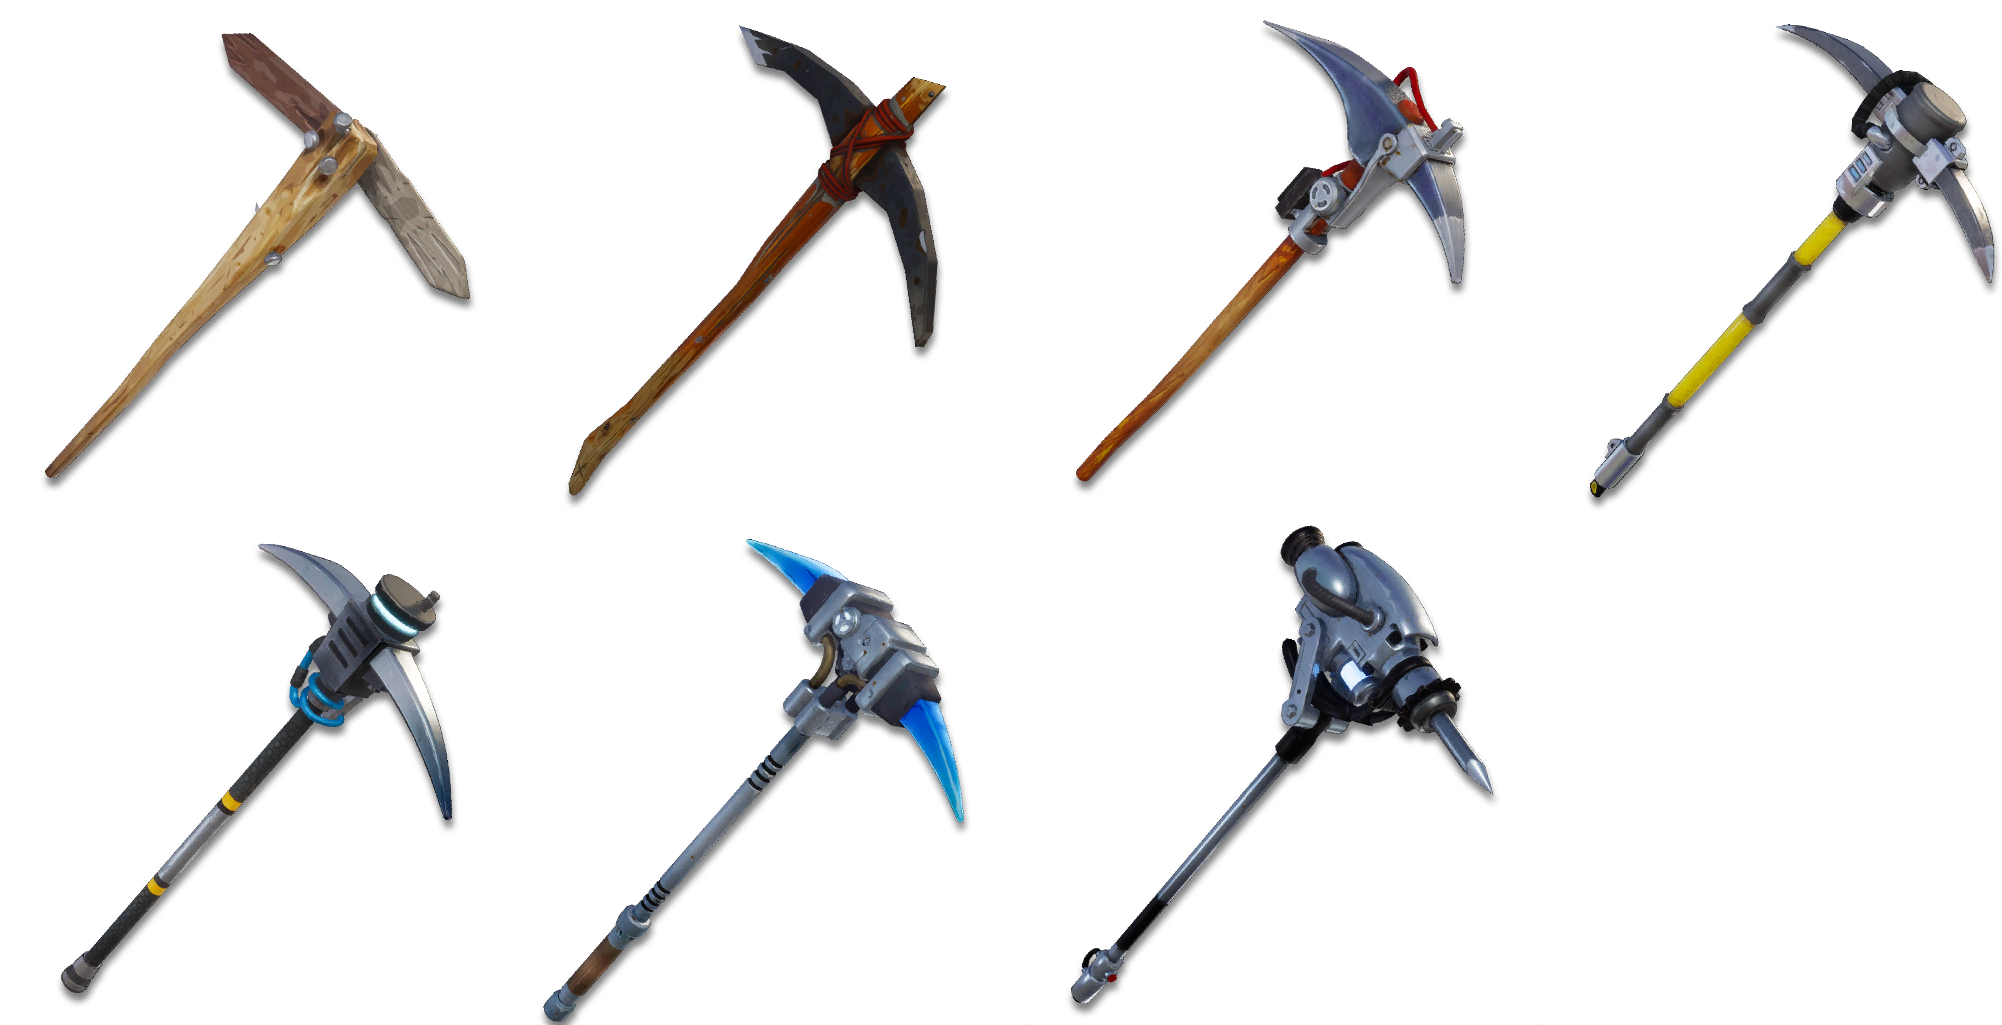 Can Founders Get Their Pickaxes They Have From Stw - Fortnite Save The Worl...